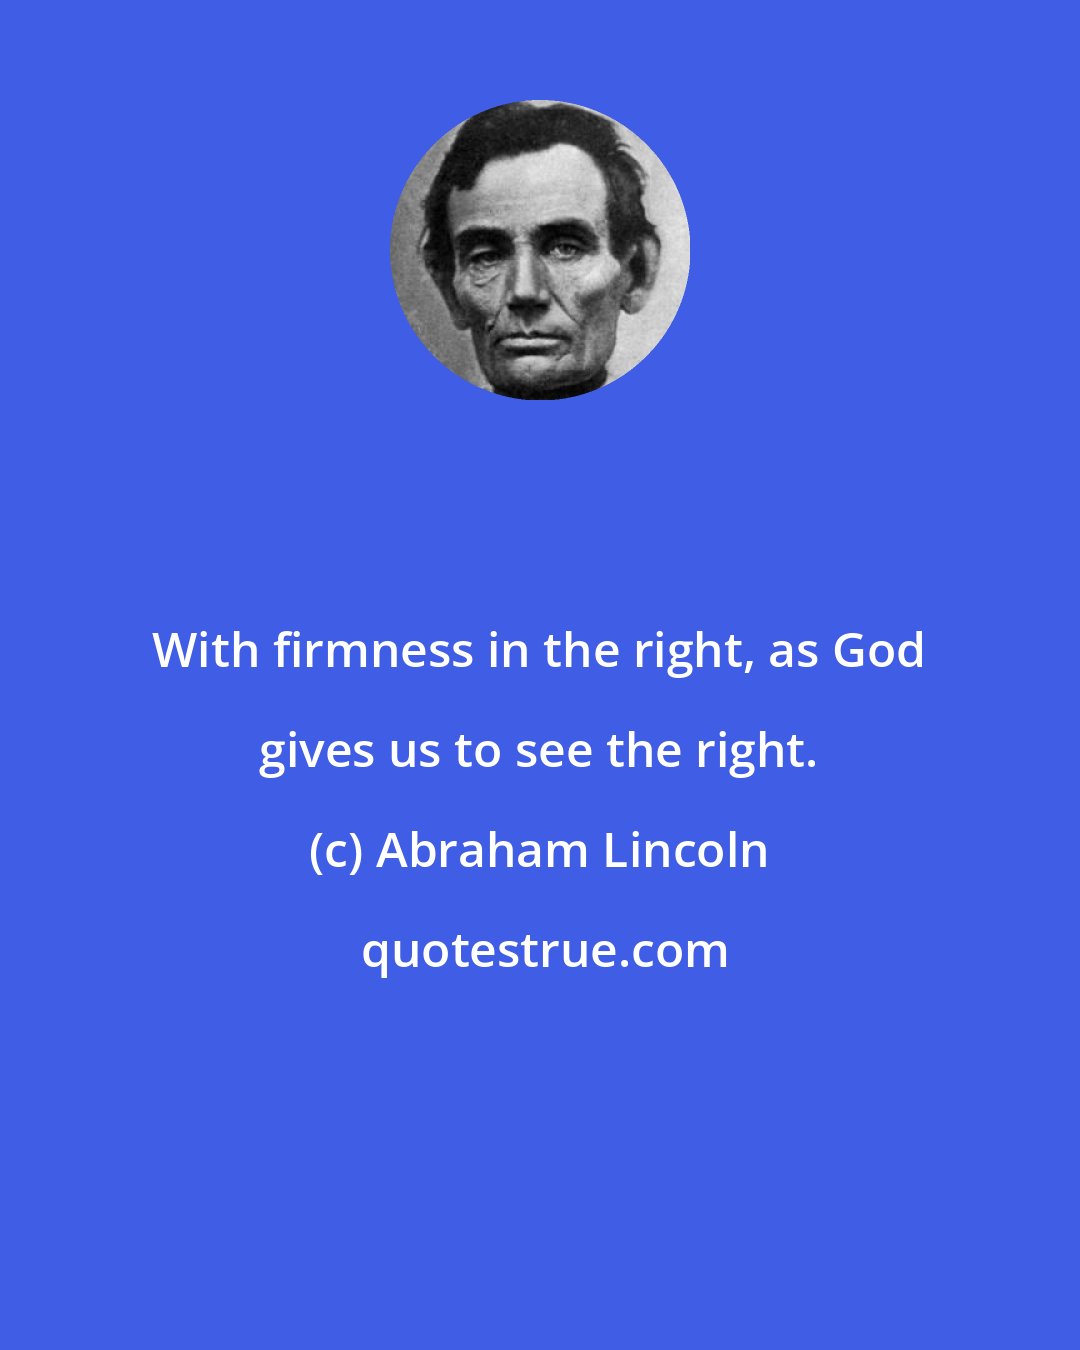 Abraham Lincoln: With firmness in the right, as God gives us to see the right.